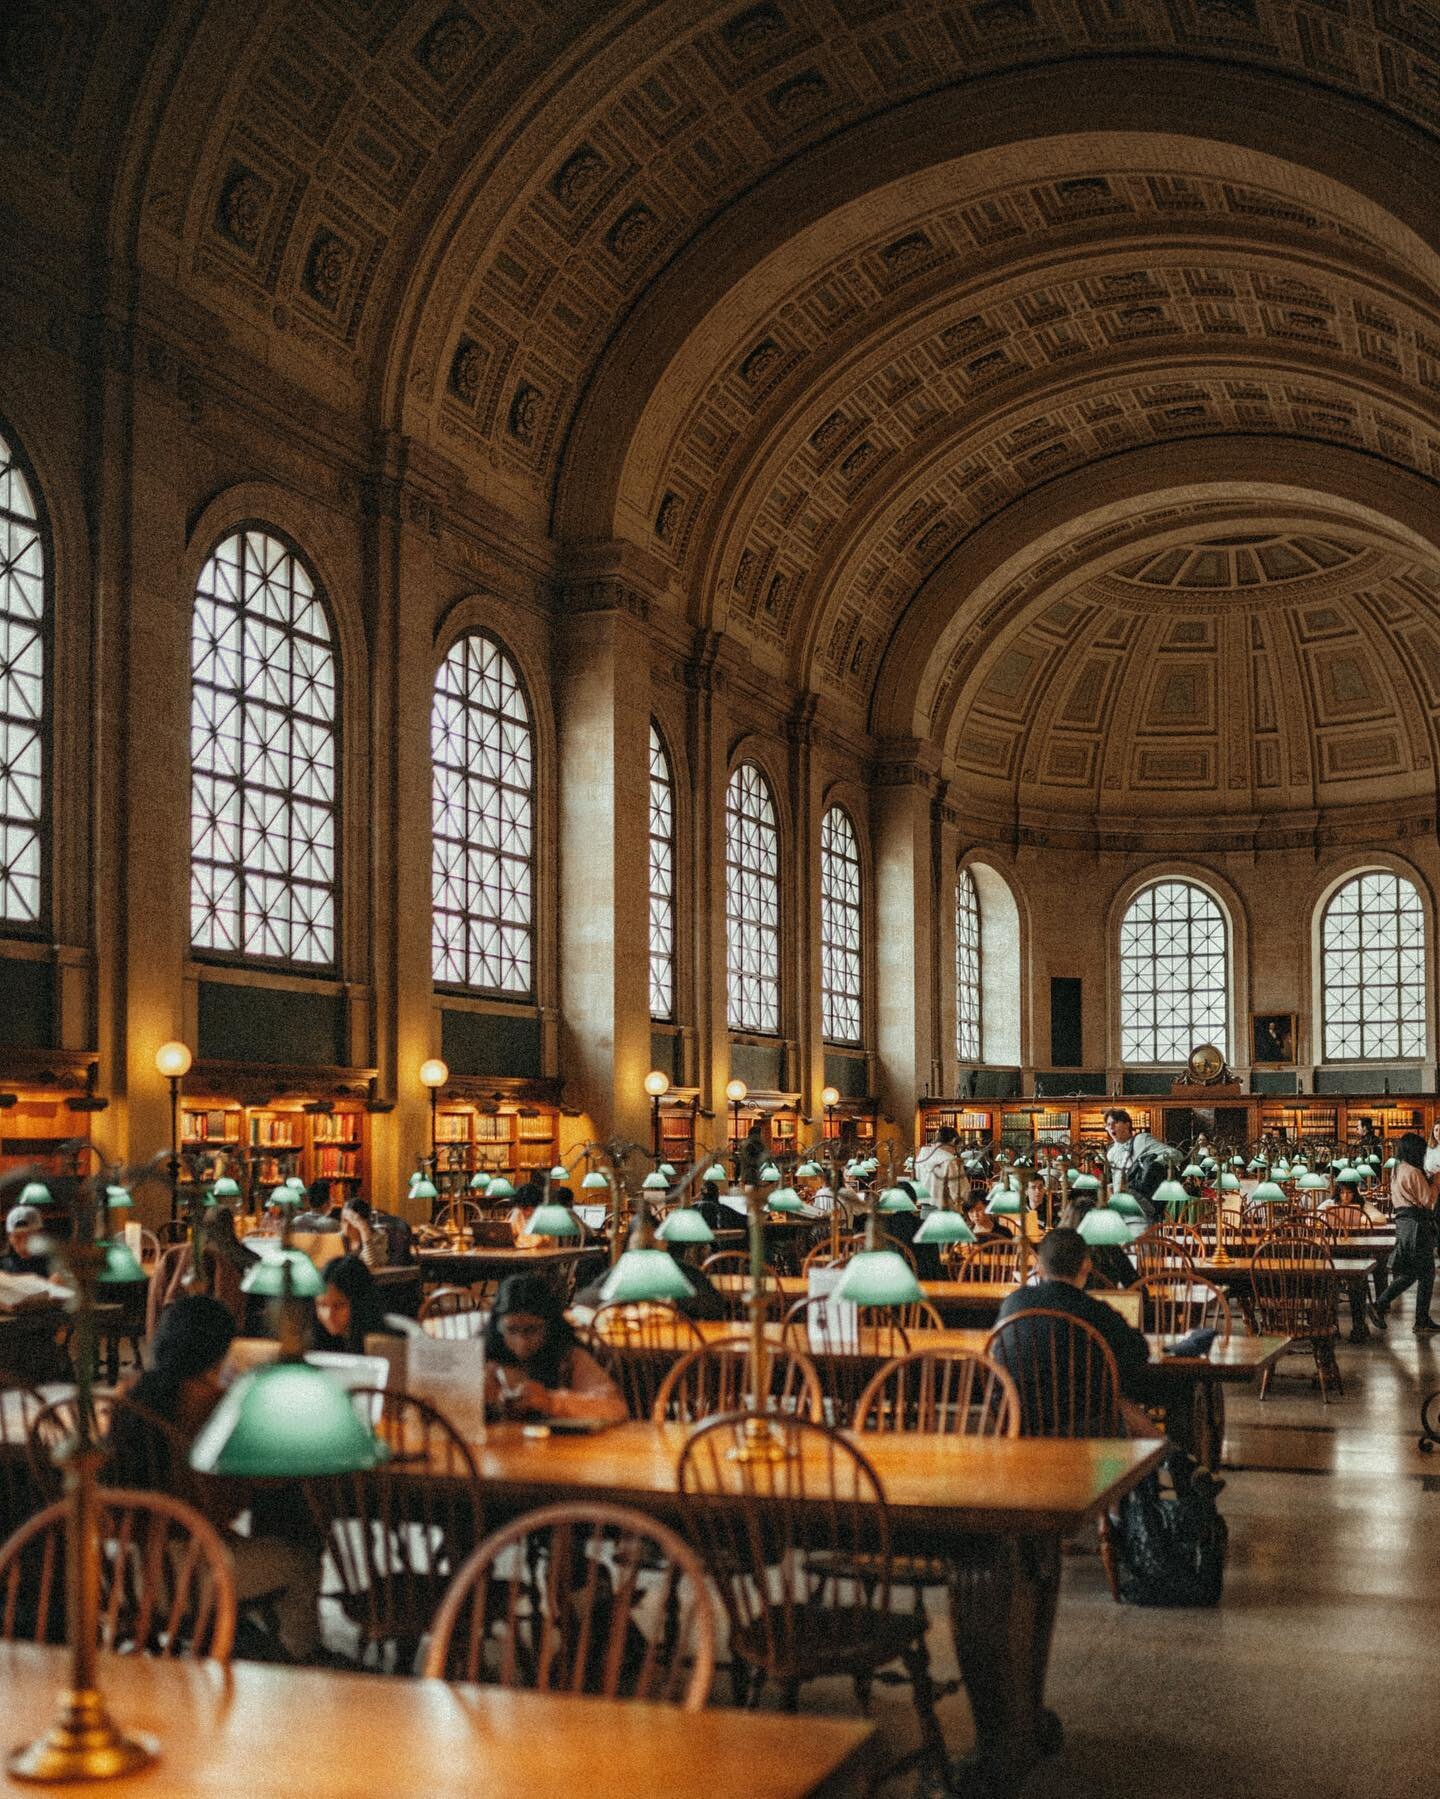 Happy Weekend! 📚 I stopped by the Boston Public Library in Copley yesterday and I forgot how much I love this place! I used to practically live here when I was in college and actually finished writing a book here (never published, but still proud of